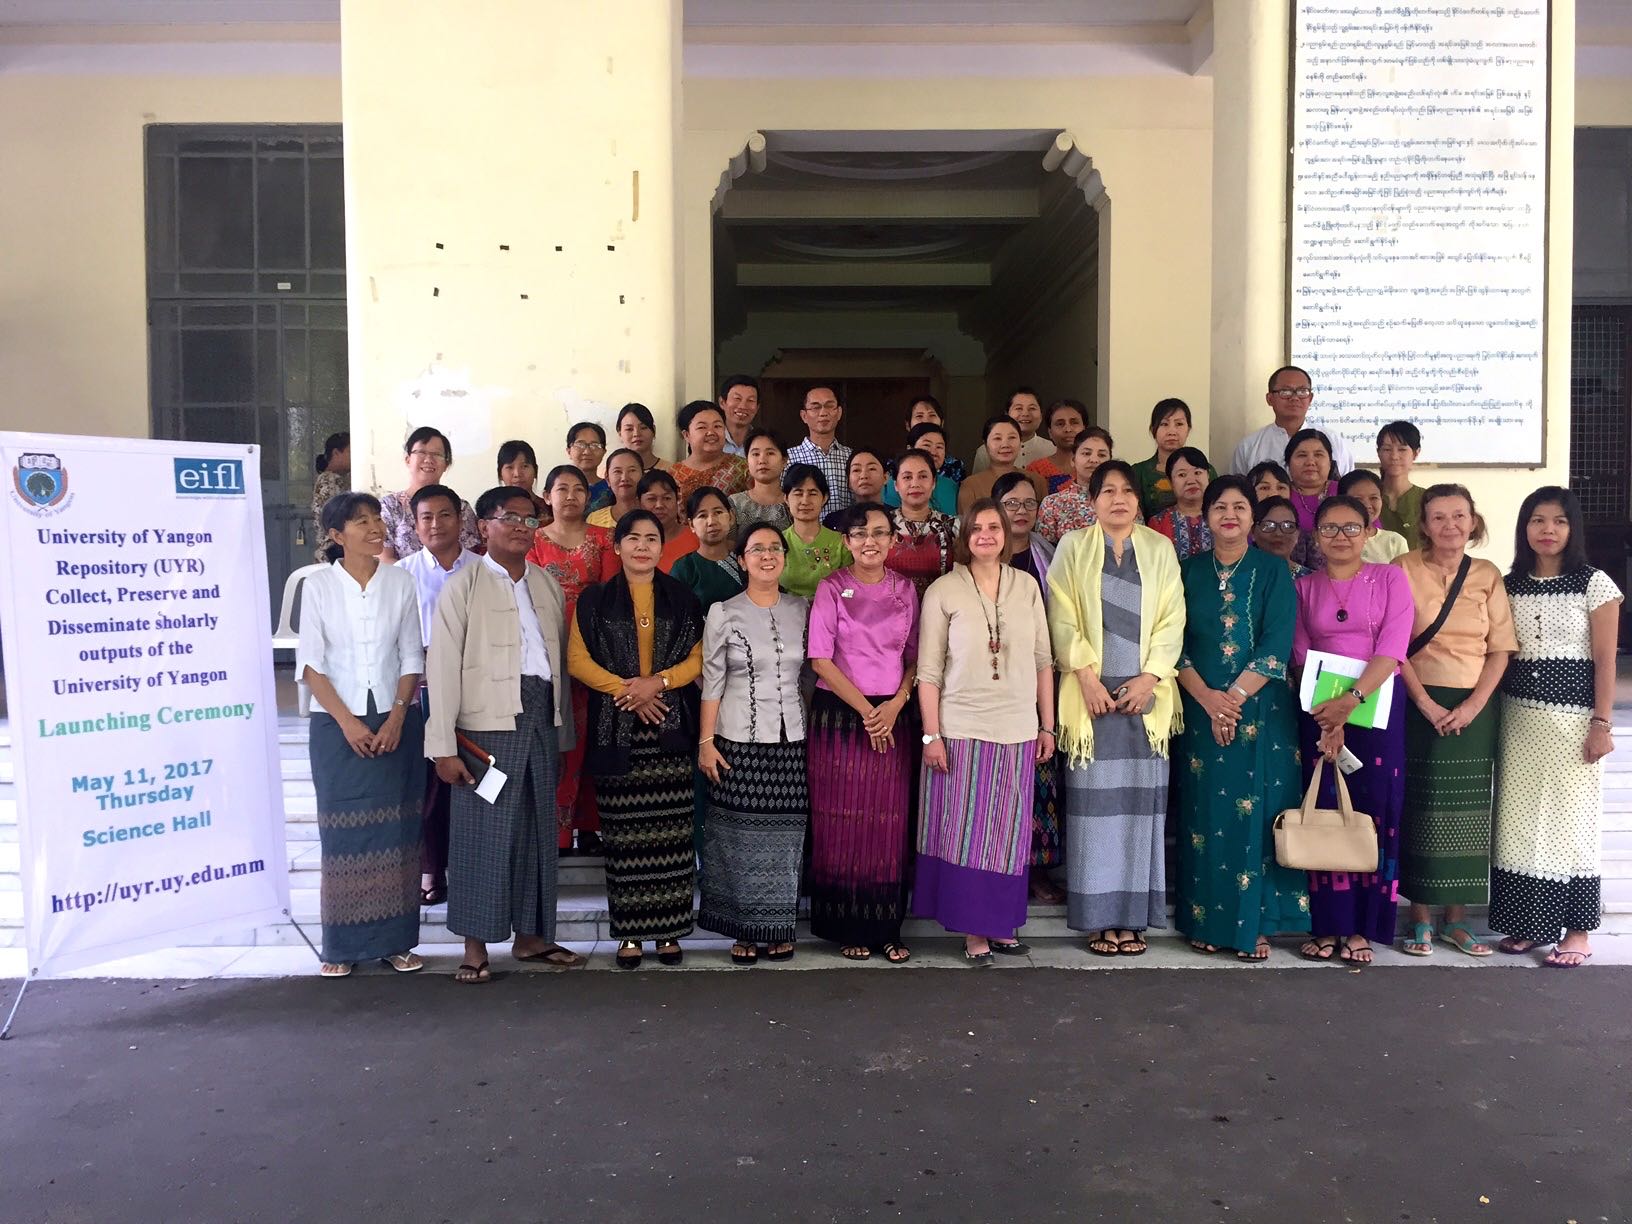 Participants at the launch of University of Yangon’s open access repository.